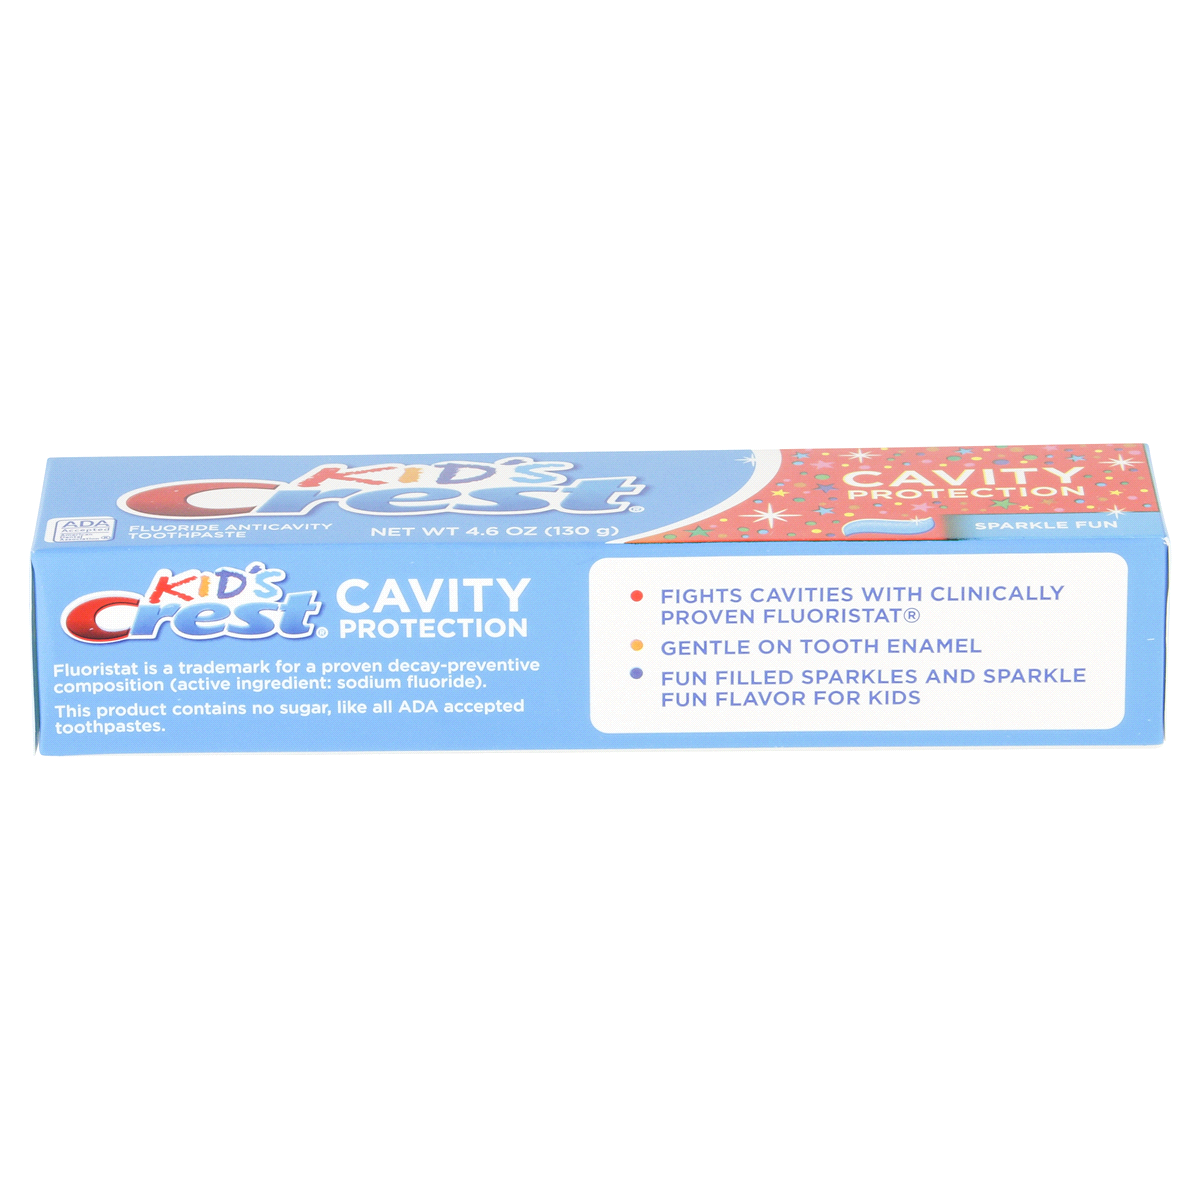 slide 4 of 4, Crest Kids Cavity Protection Sparkle Fun Toothpaste, 4.6 oz